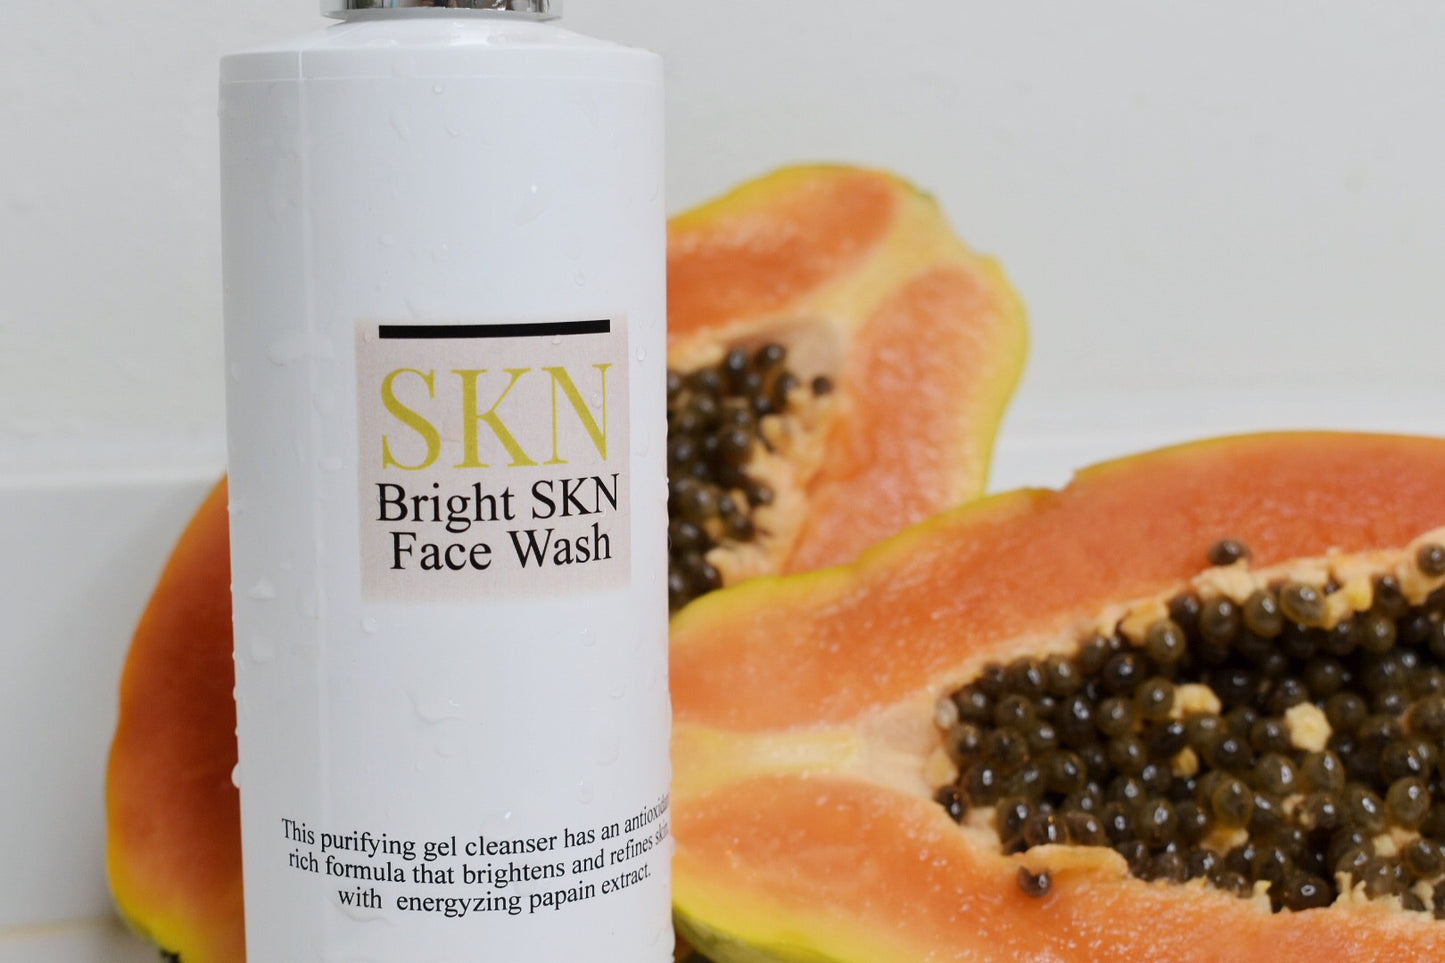 Bright SKN Face Wash